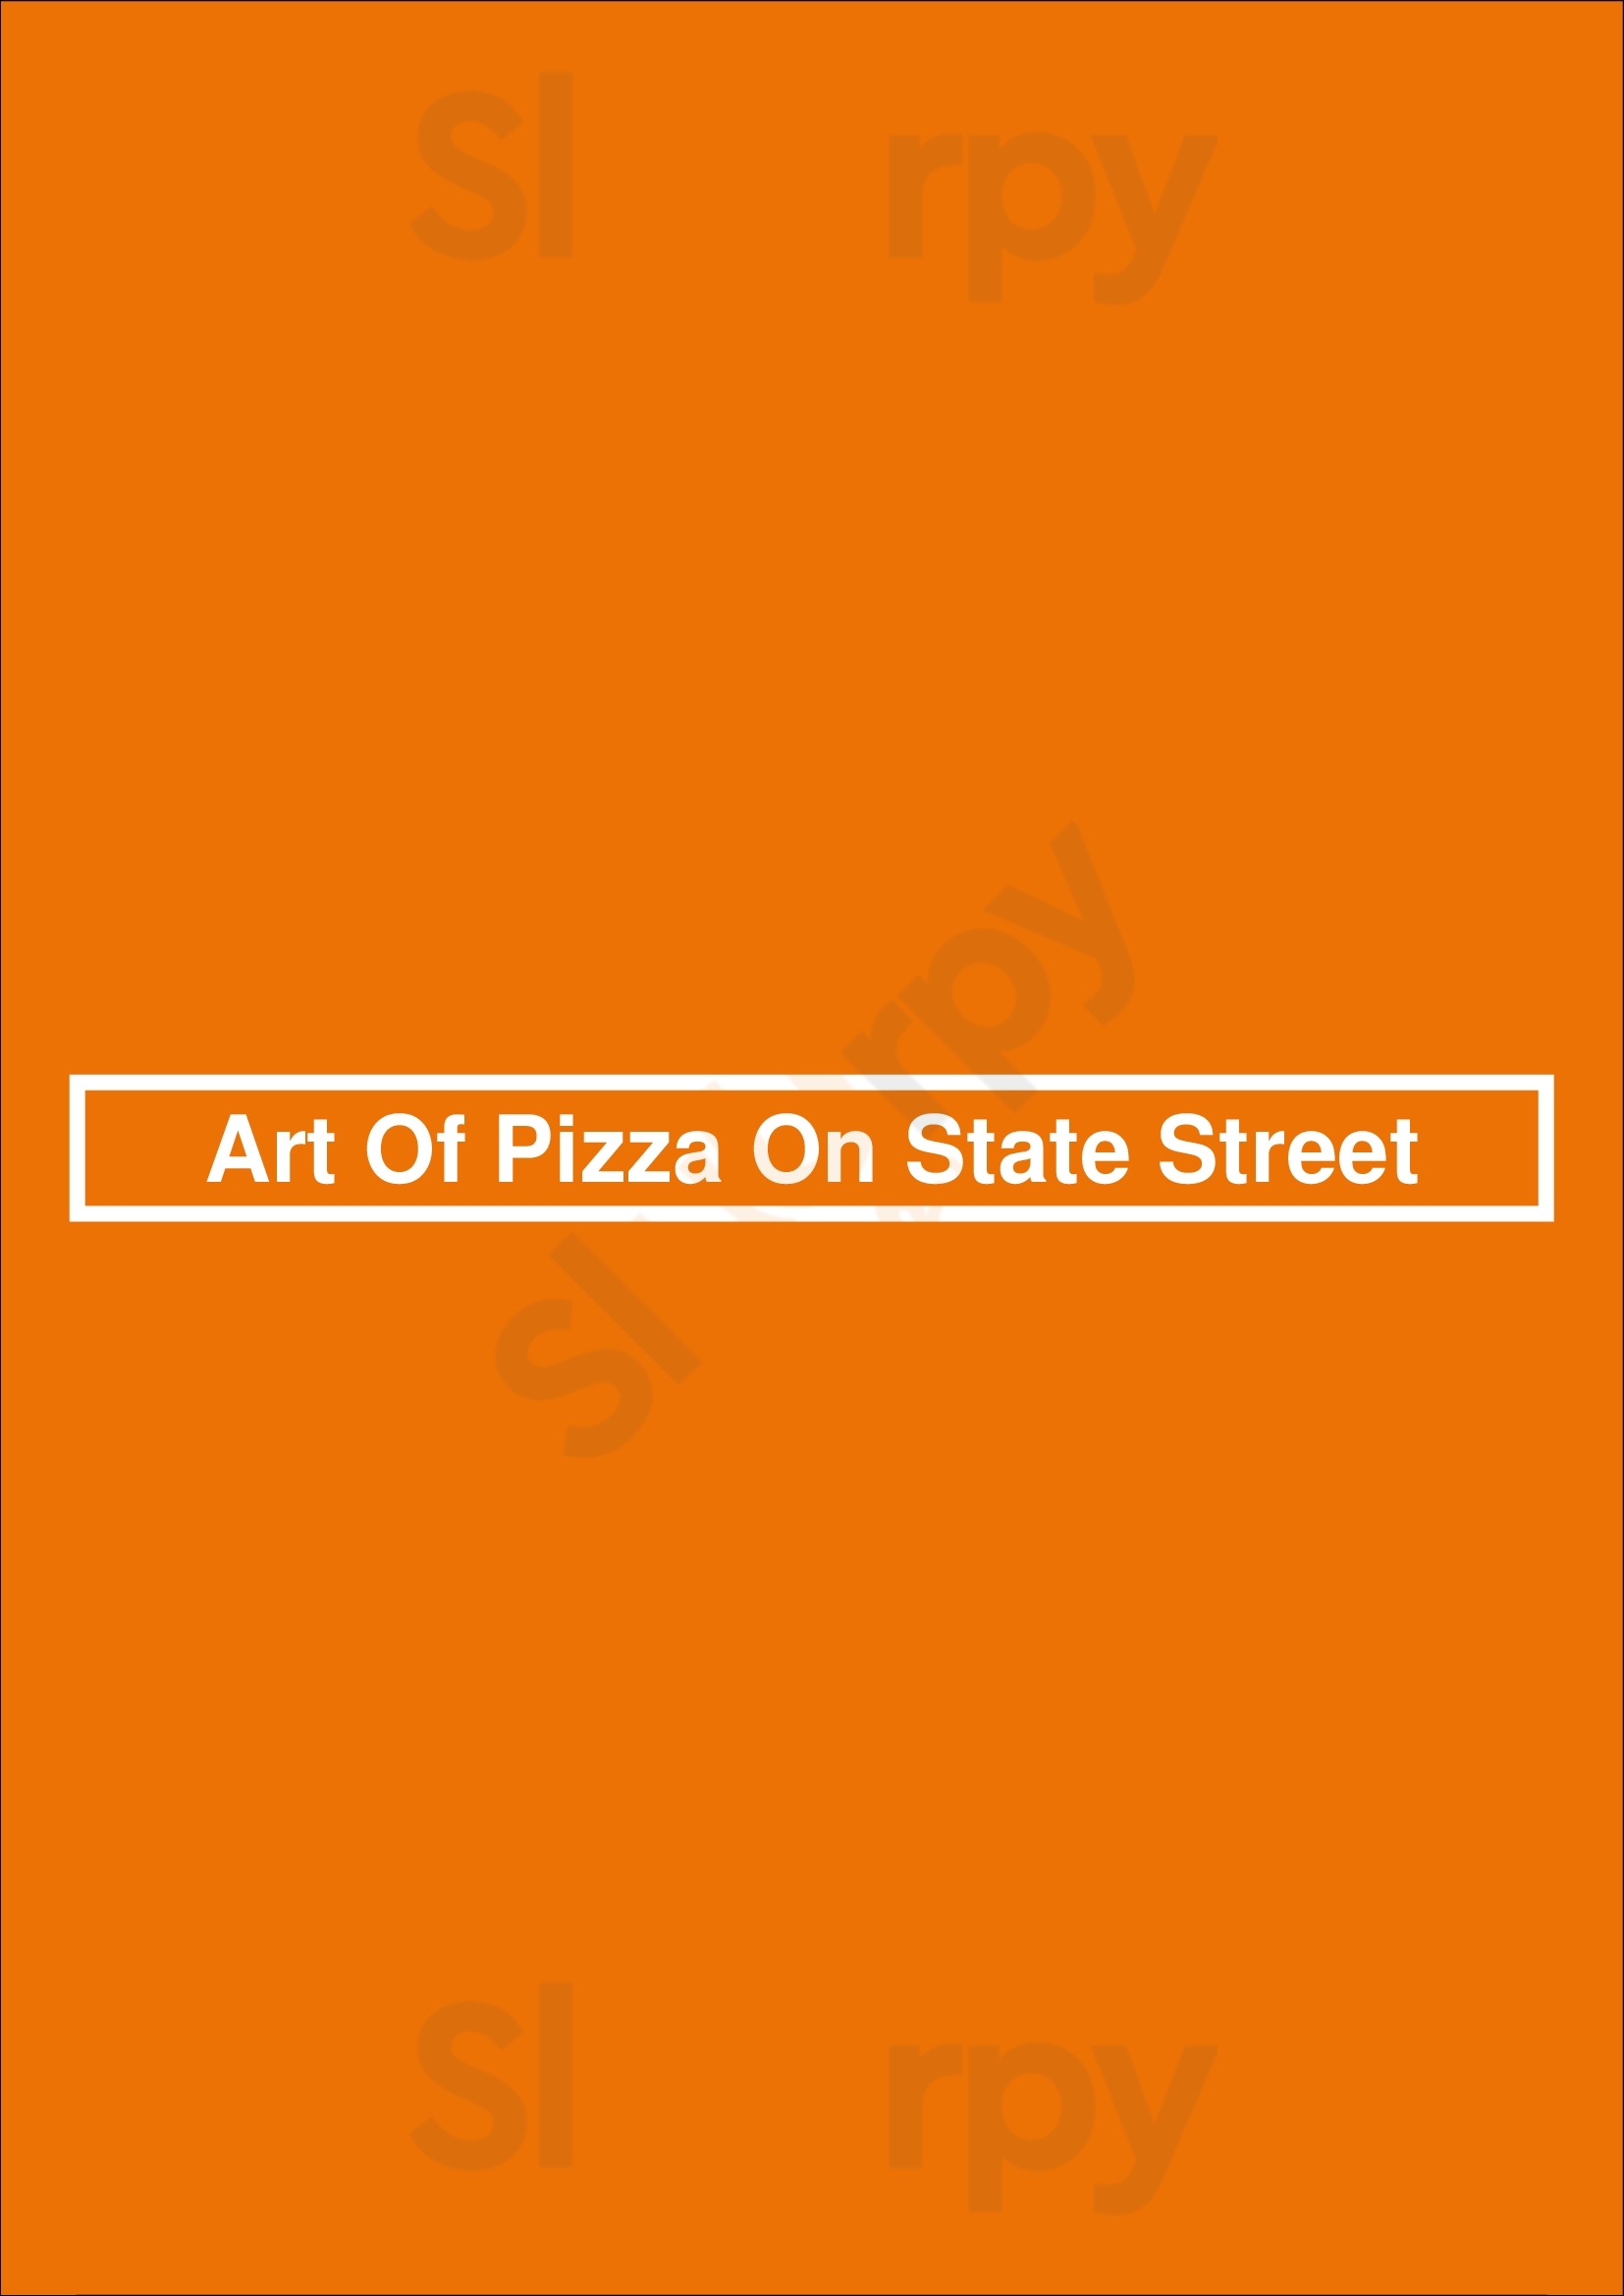 Art Of Pizza On State Street Chicago Menu - 1